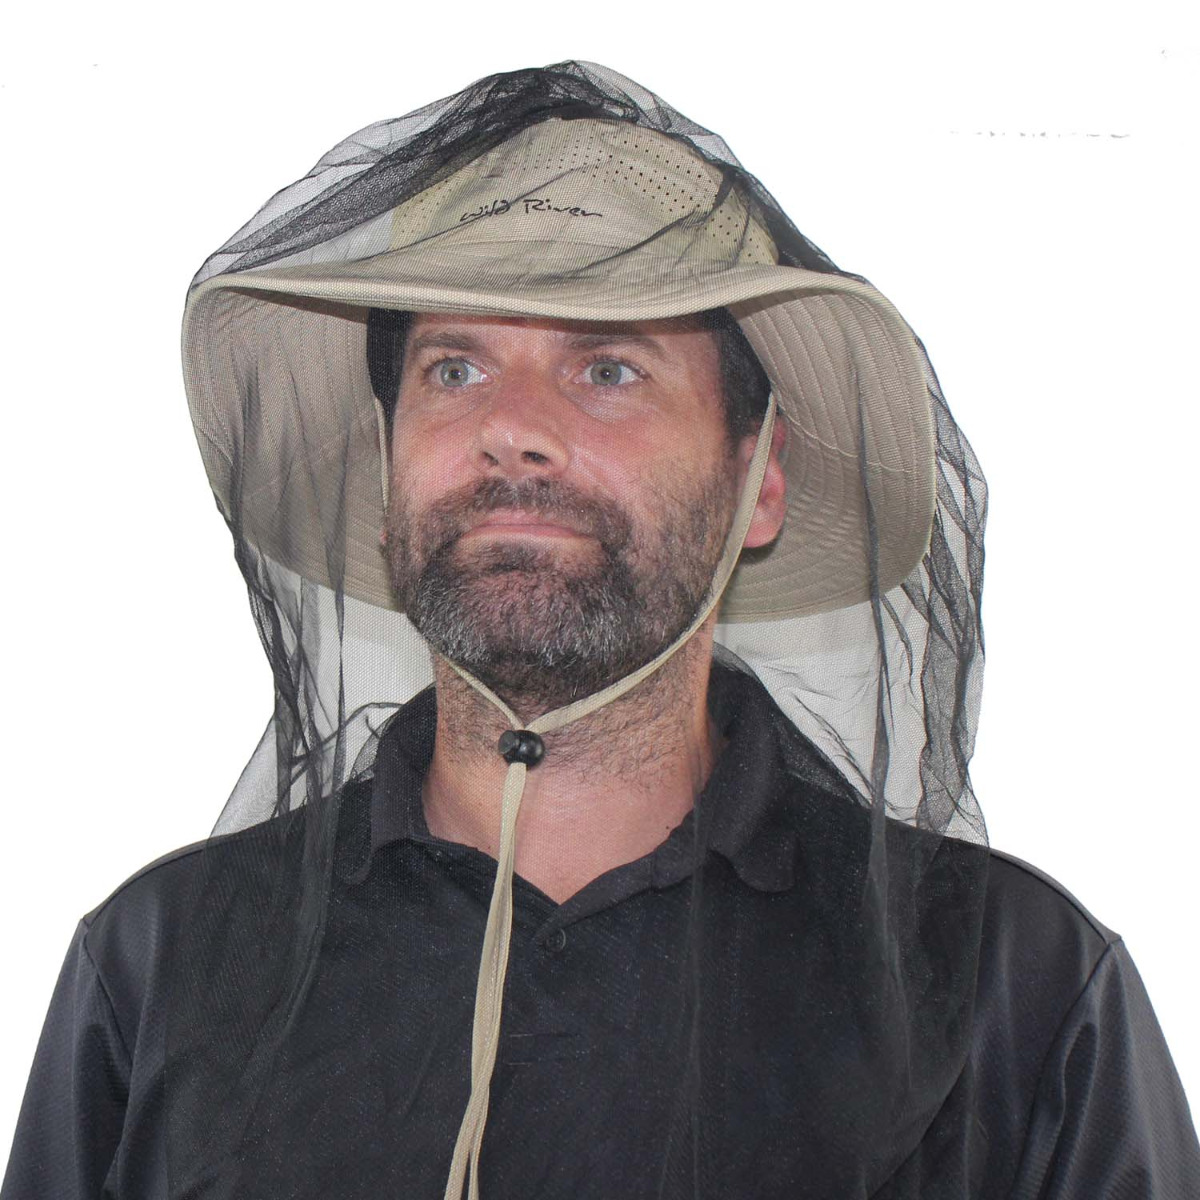 WILD RIVER BUSH HAT SAND WITH NETTING IN TOP